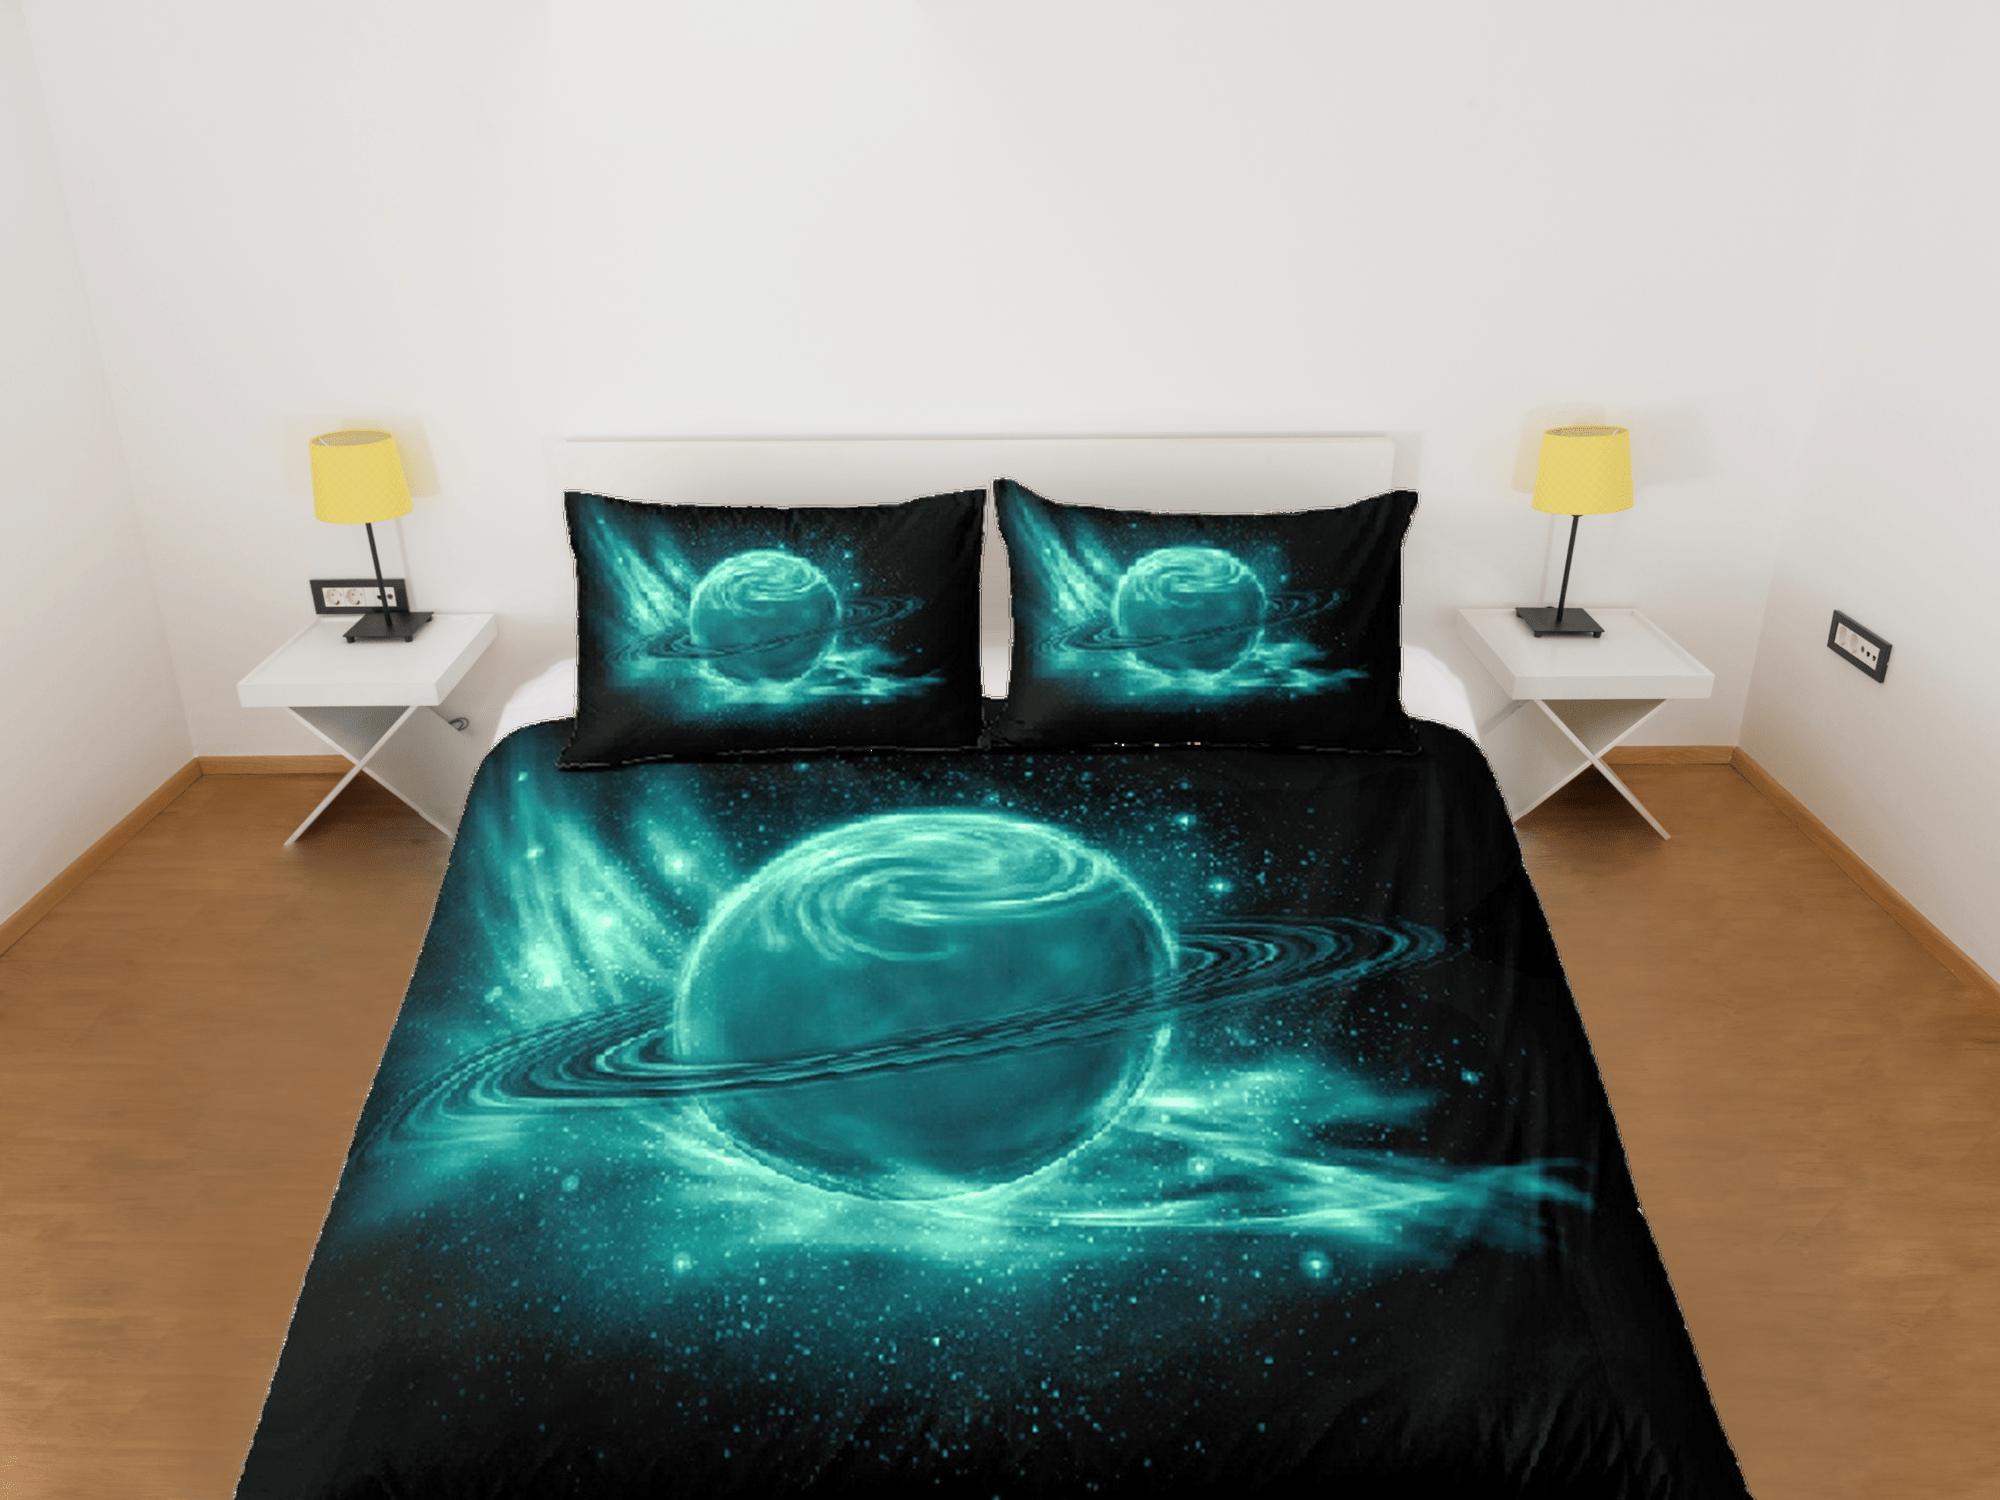 daintyduvet Green planet duvet cover set, Saturn galaxy bedding, outer space bedding set full, duvet cover king, queen, dorm bedding, toddler bedding